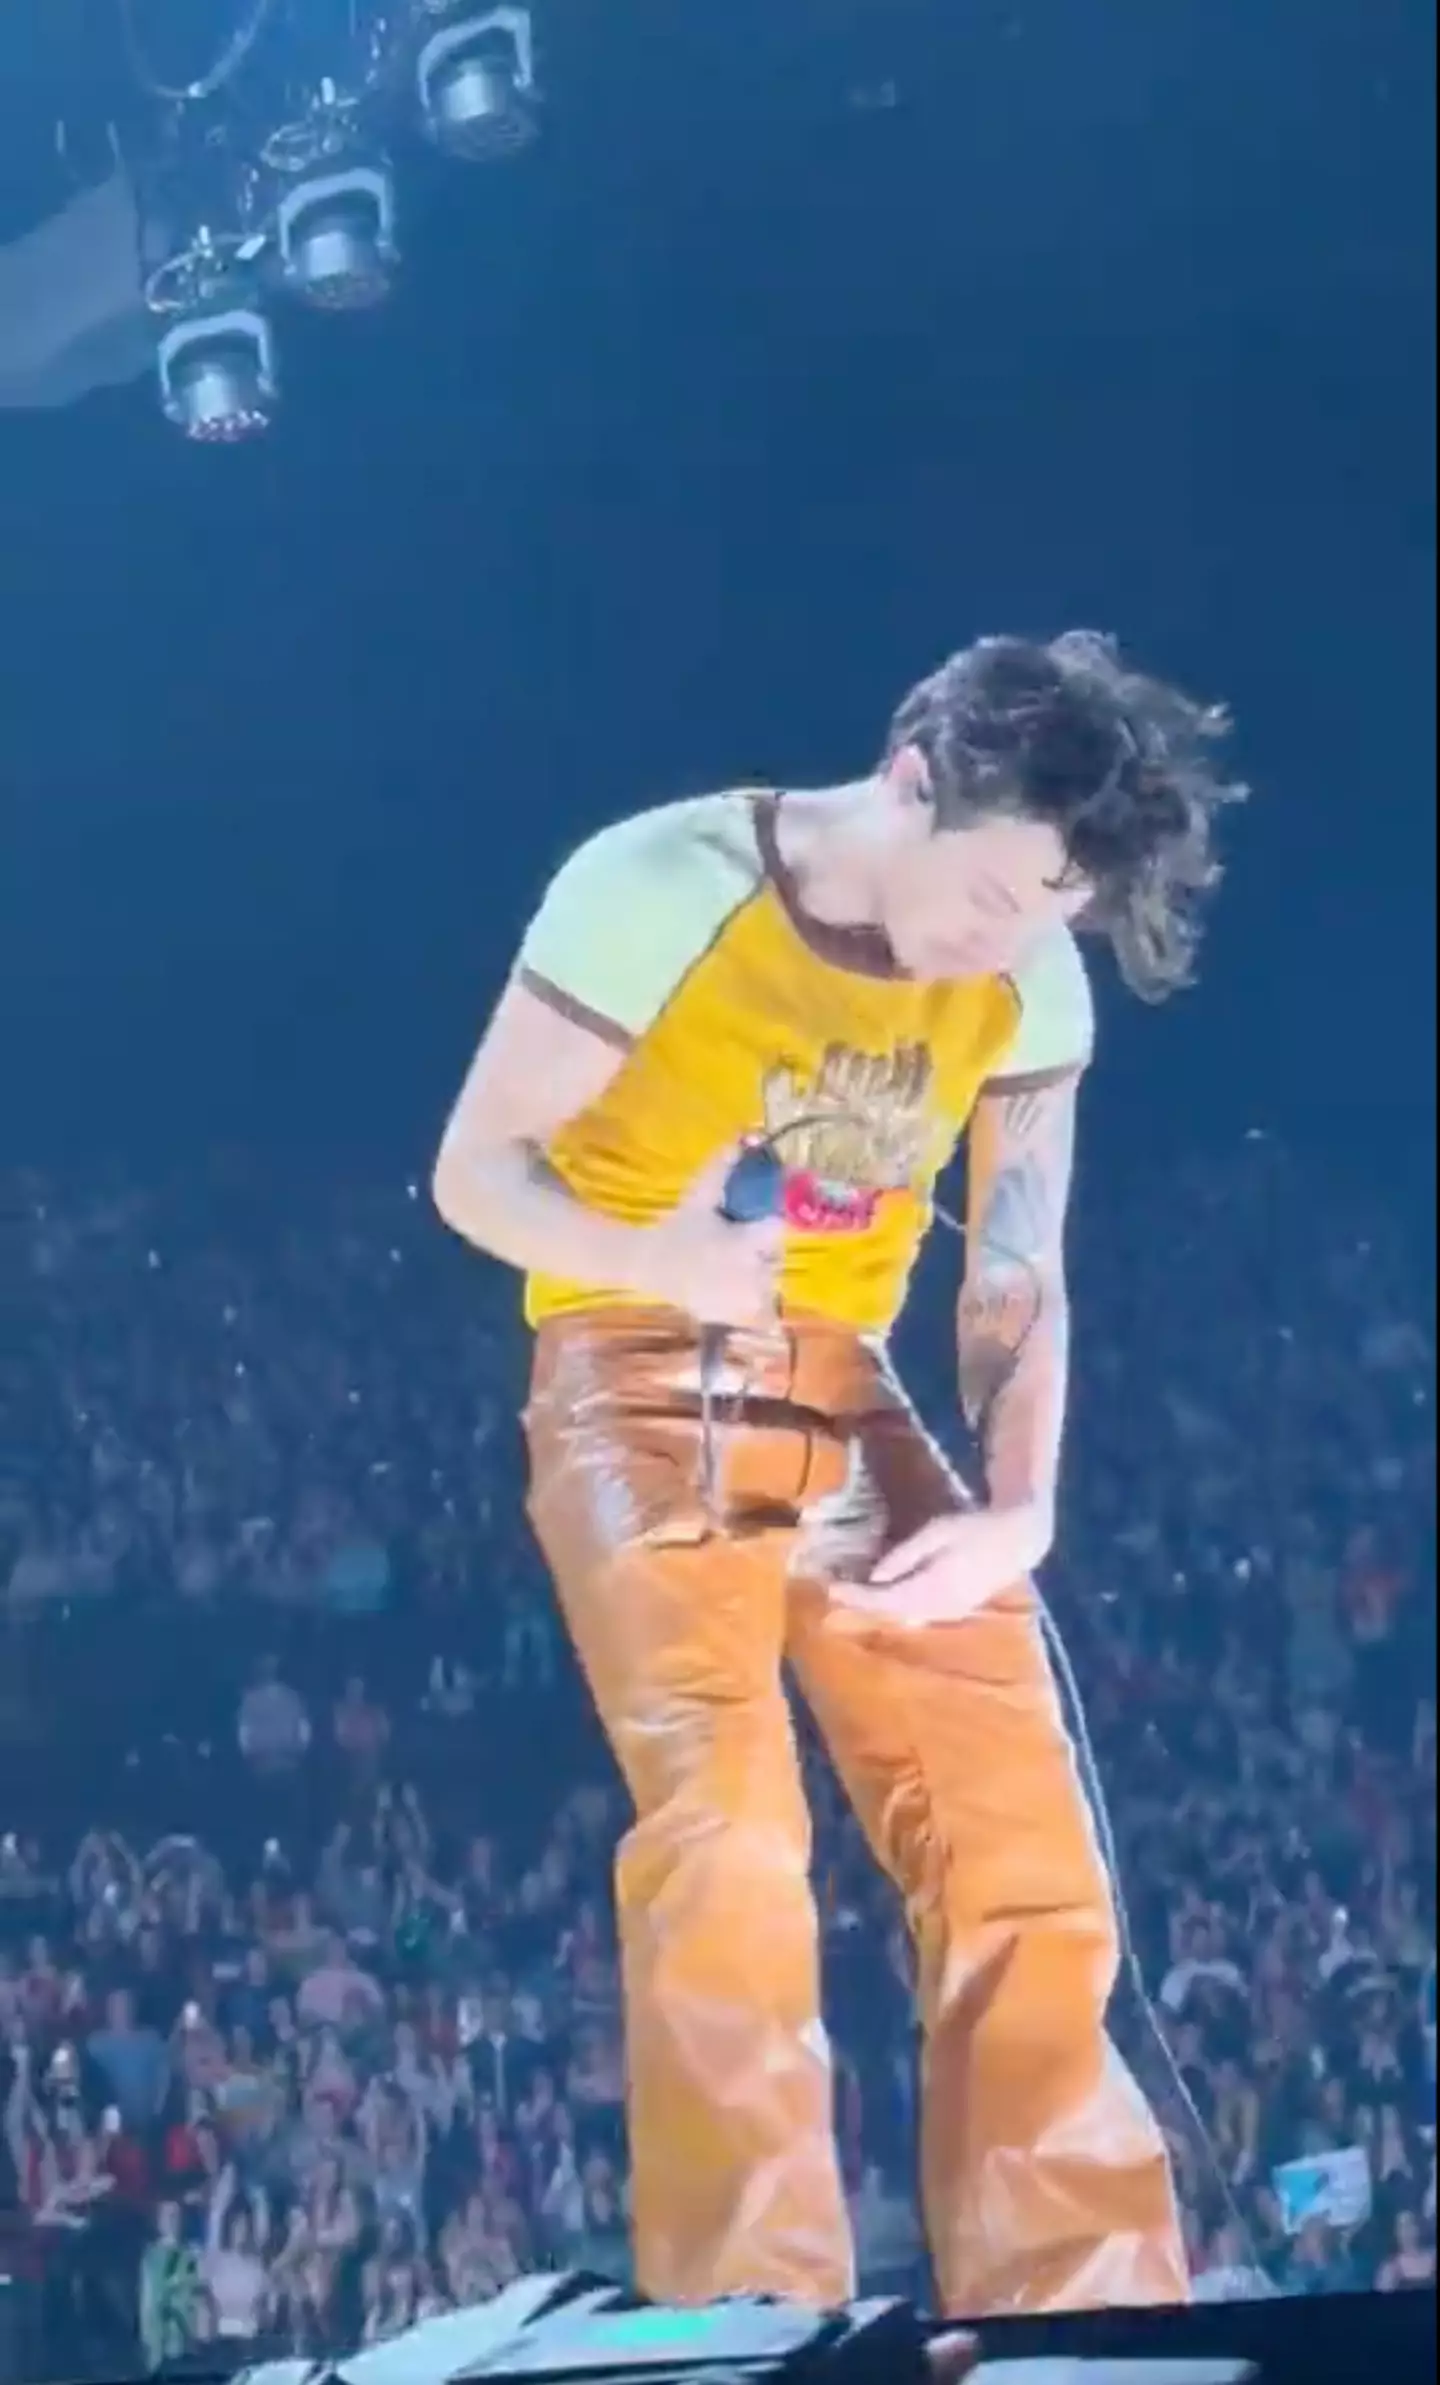 Harry immediately after his trousers ripped.